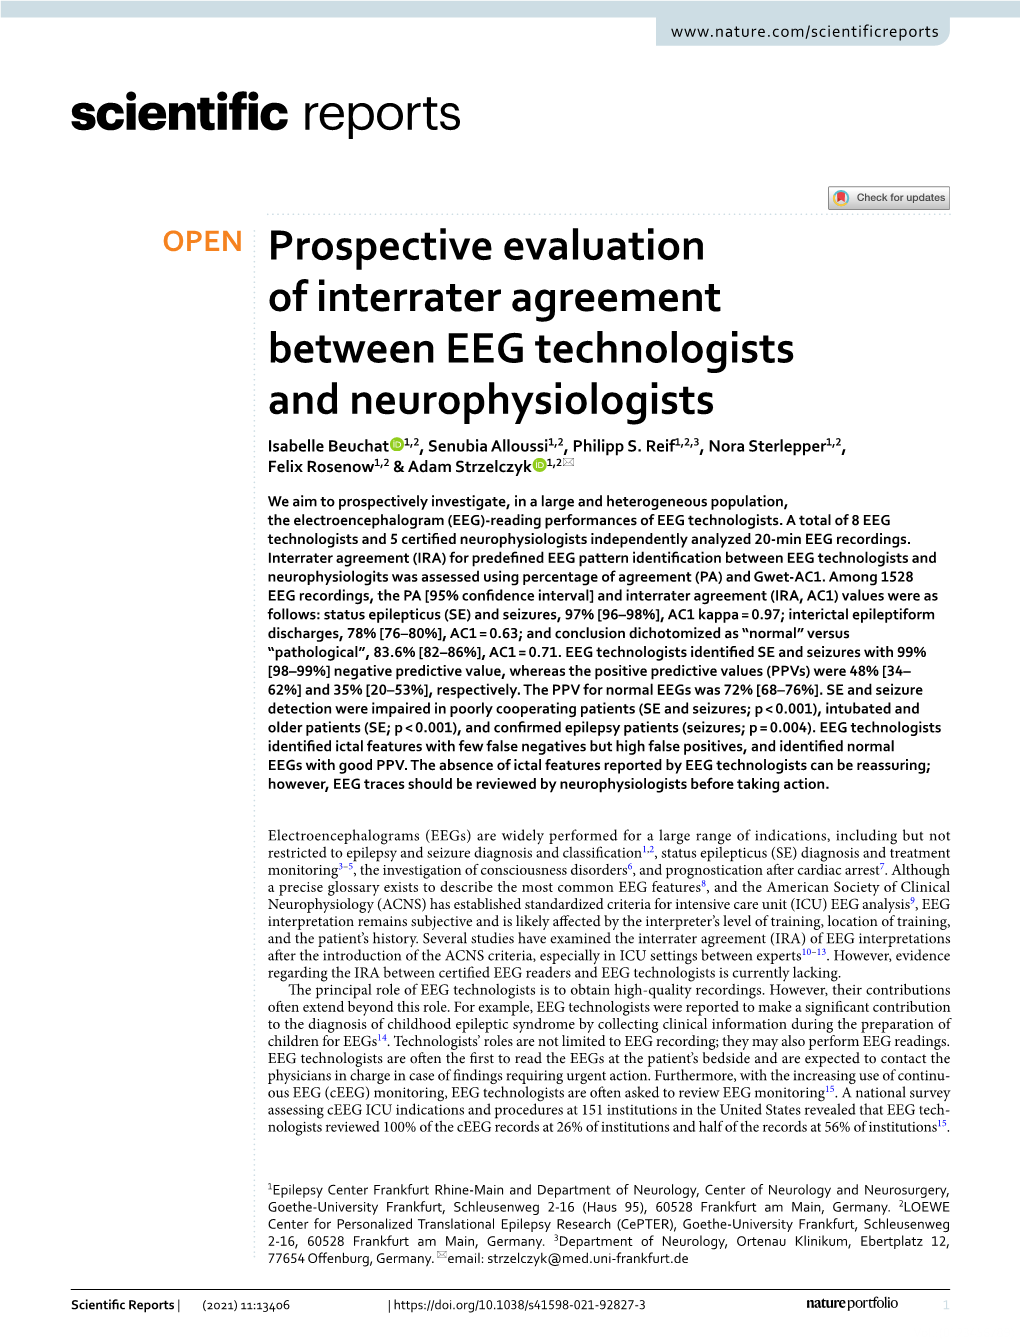 Prospective Evaluation of Interrater Agreement Between EEG Technologists and Neurophysiologists Isabelle Beuchat 1,2, Senubia Alloussi1,2, Philipp S